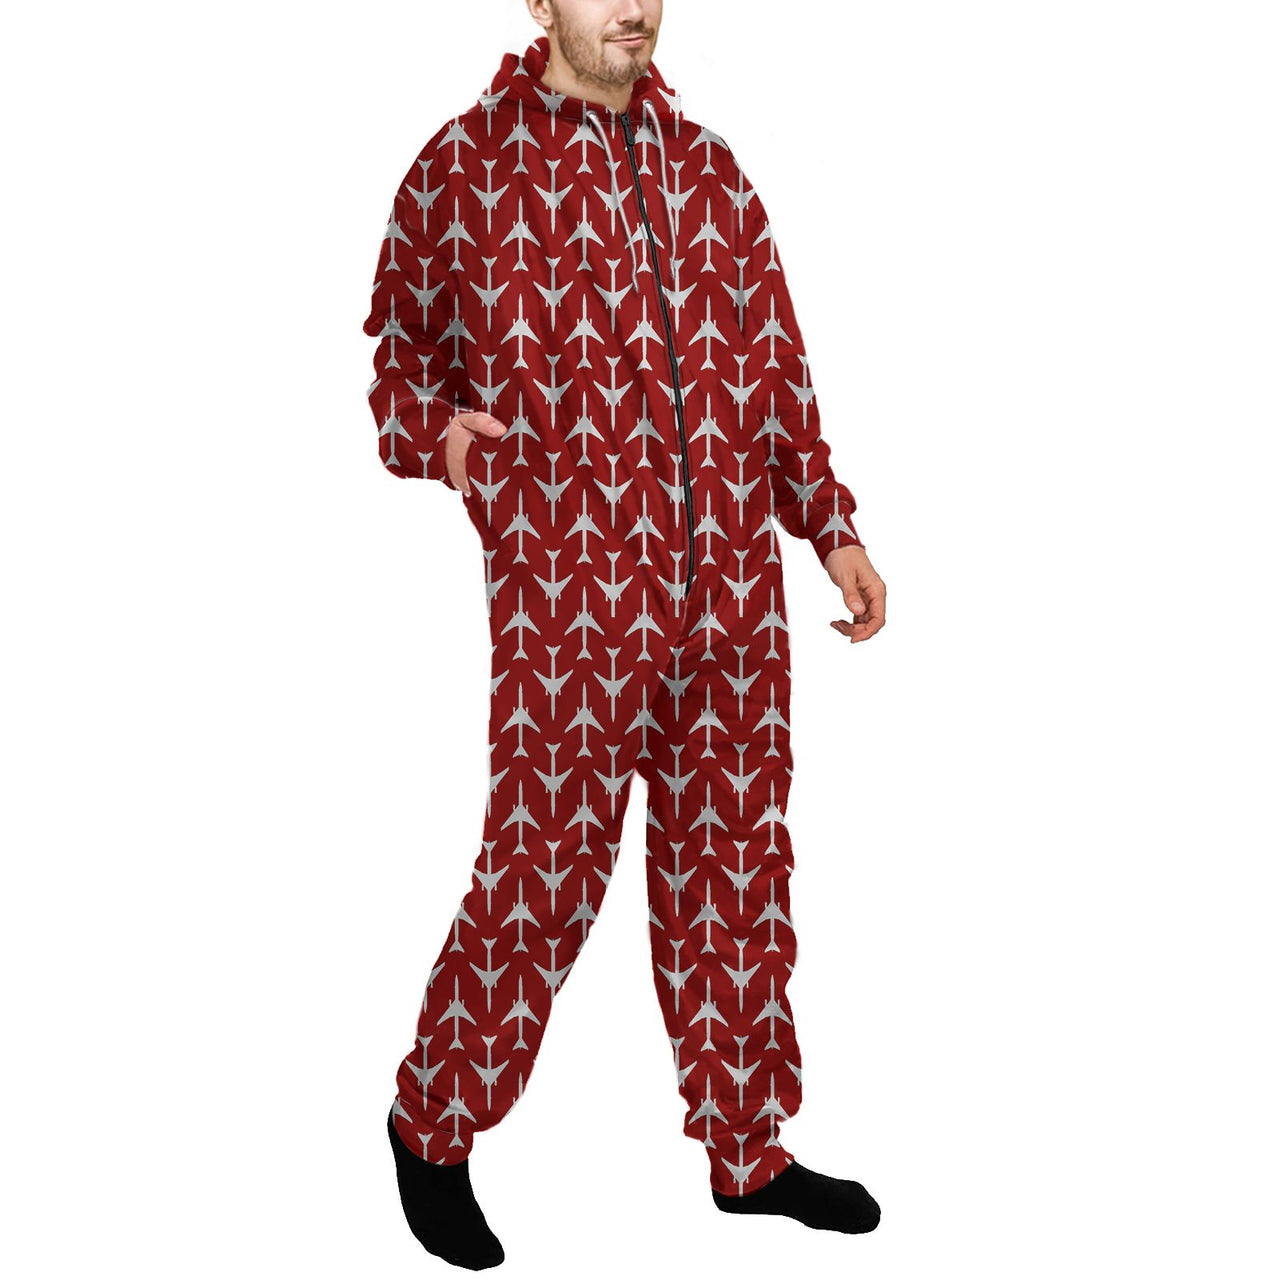 Perfectly Sized Seamless Airplanes Red Designed Jumpsuit for Men & Women